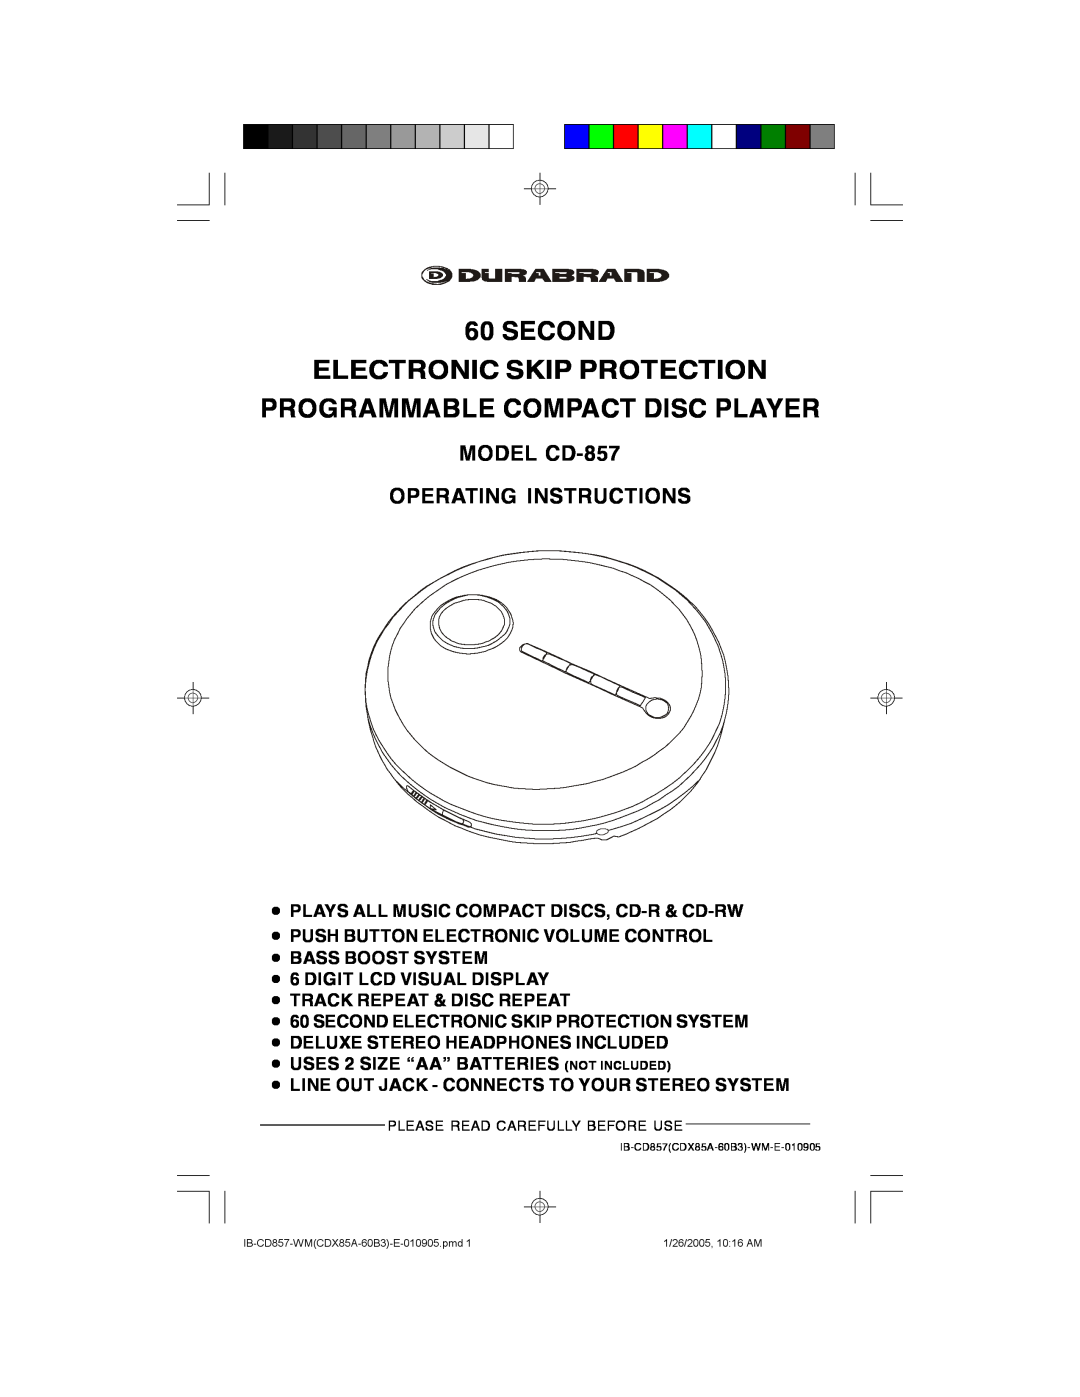 Lenoxx Electronics manual MODEL CD-857 OPERATING INSTRUCTIONS, 60SECOND ELECTRONIC SKIP PROTECTION 